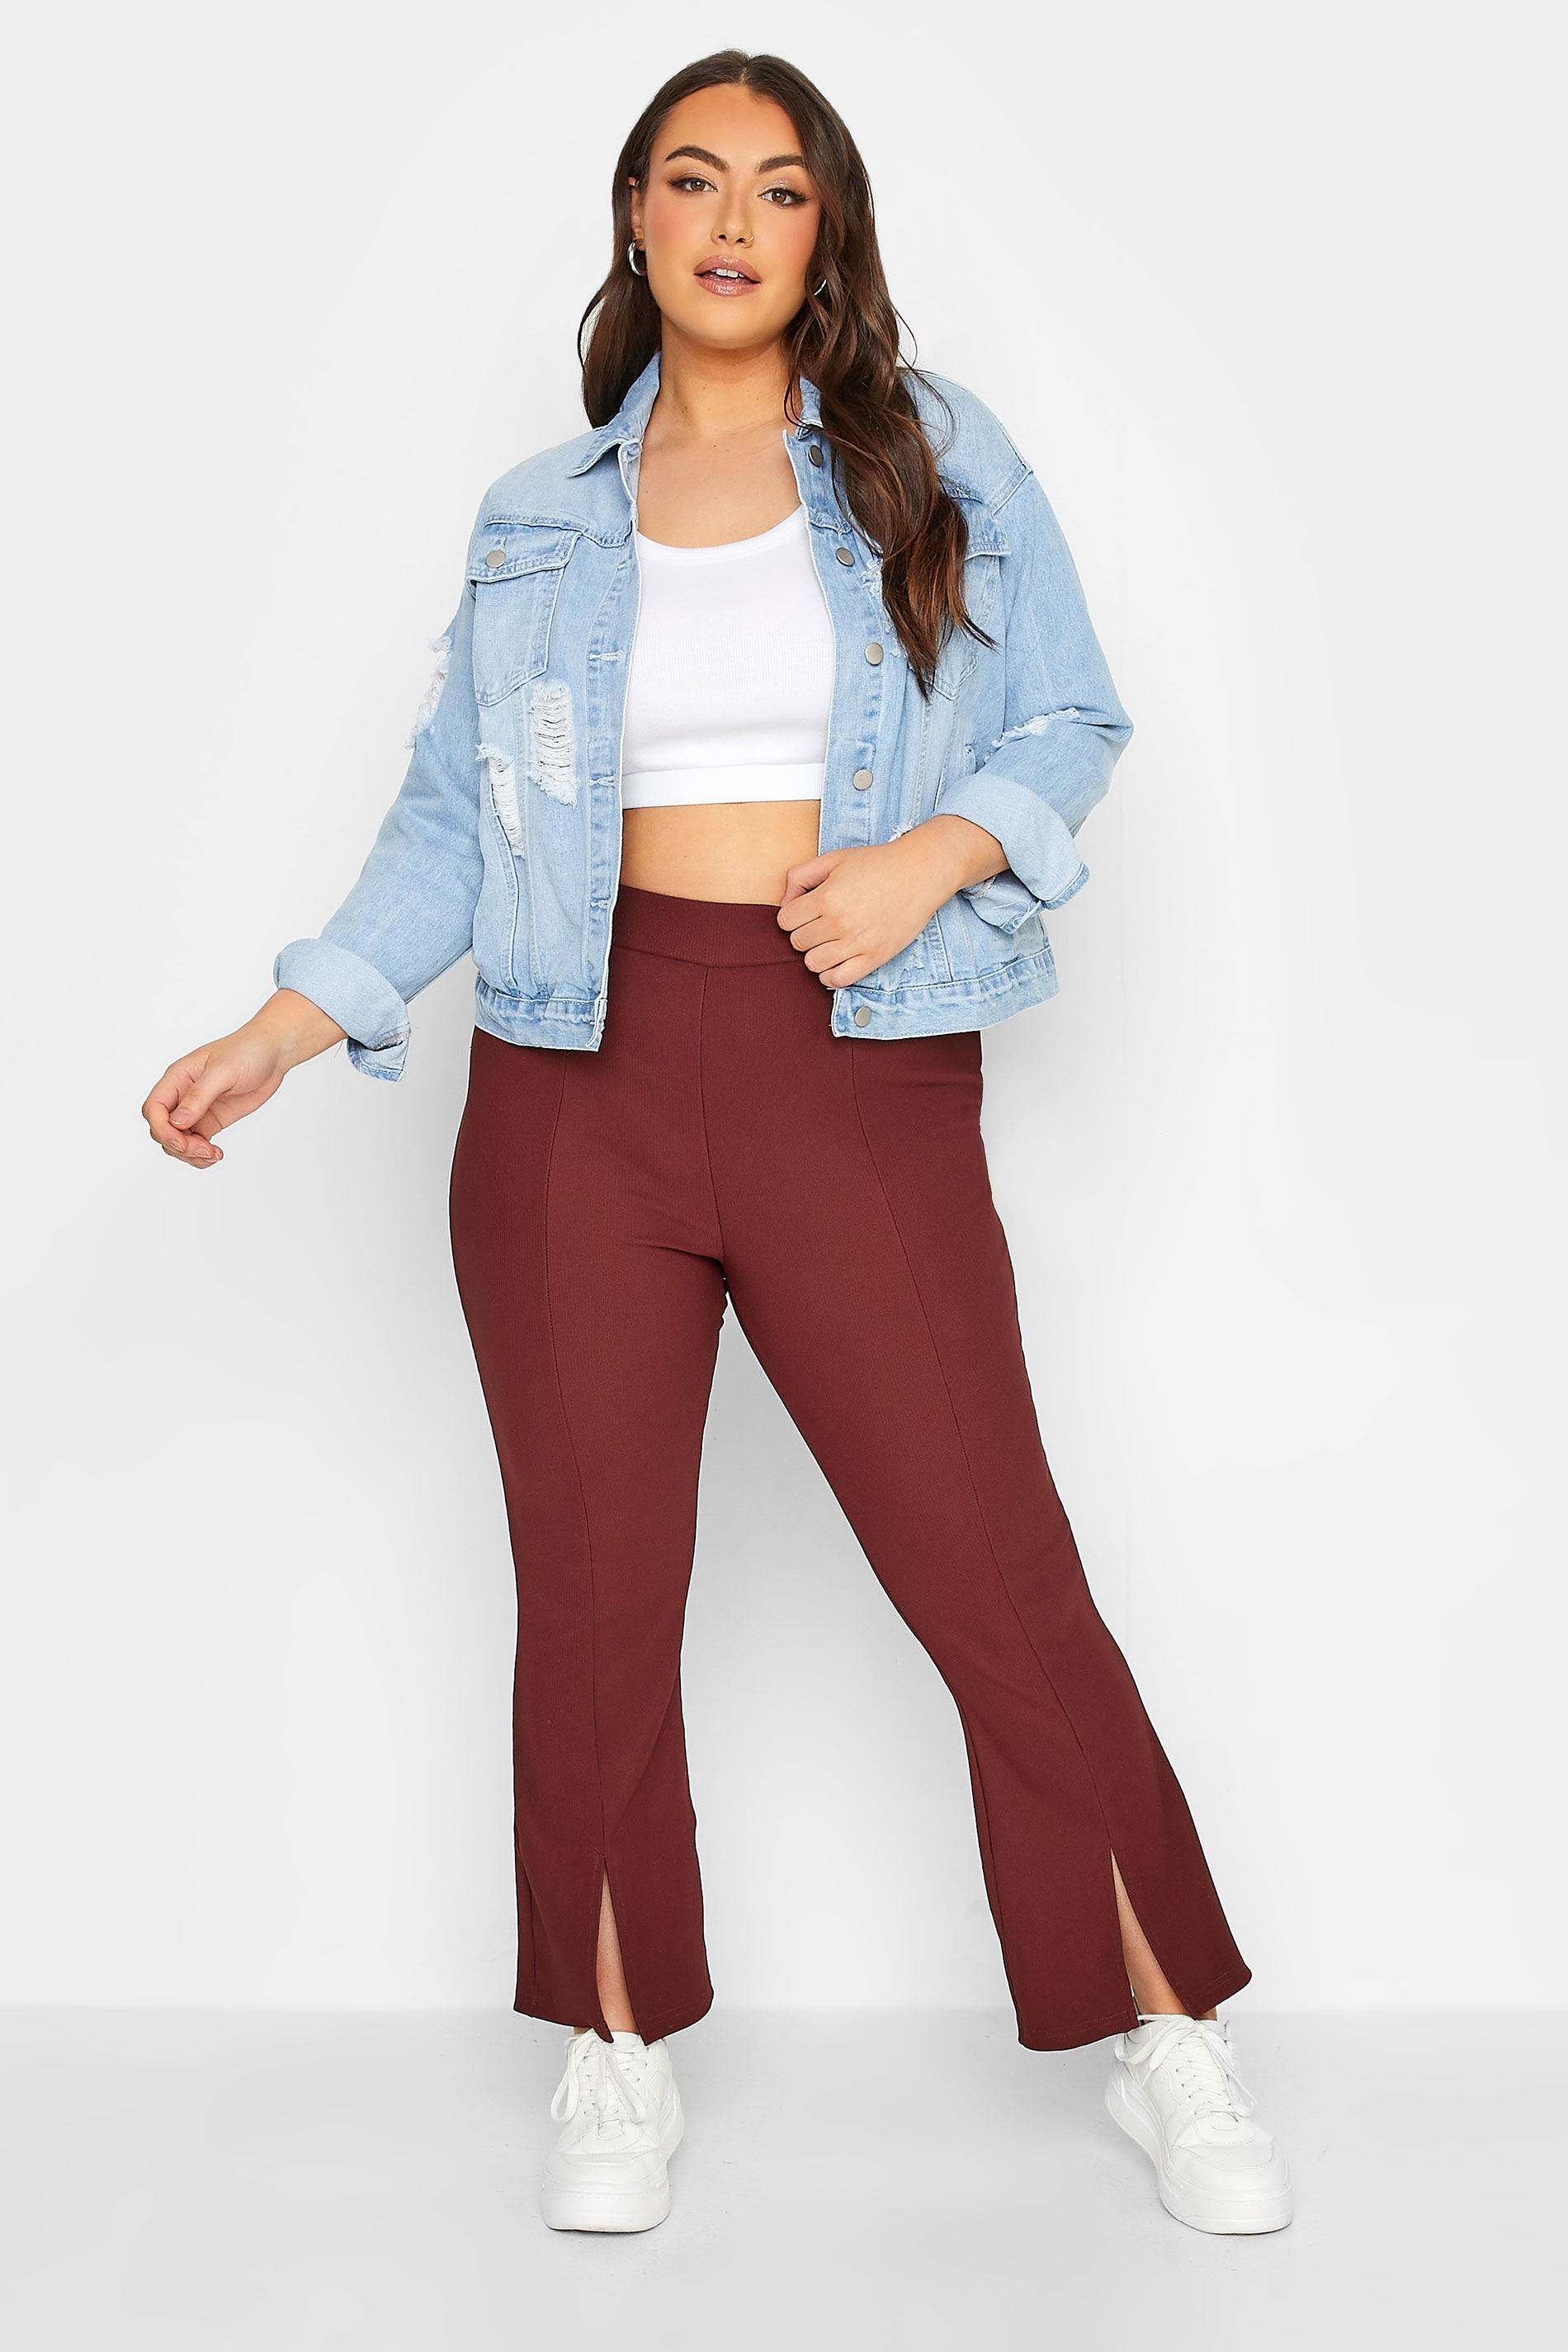 Style With Plus Size Flare Jeans  Flare pants, Flare leggings, Fashion